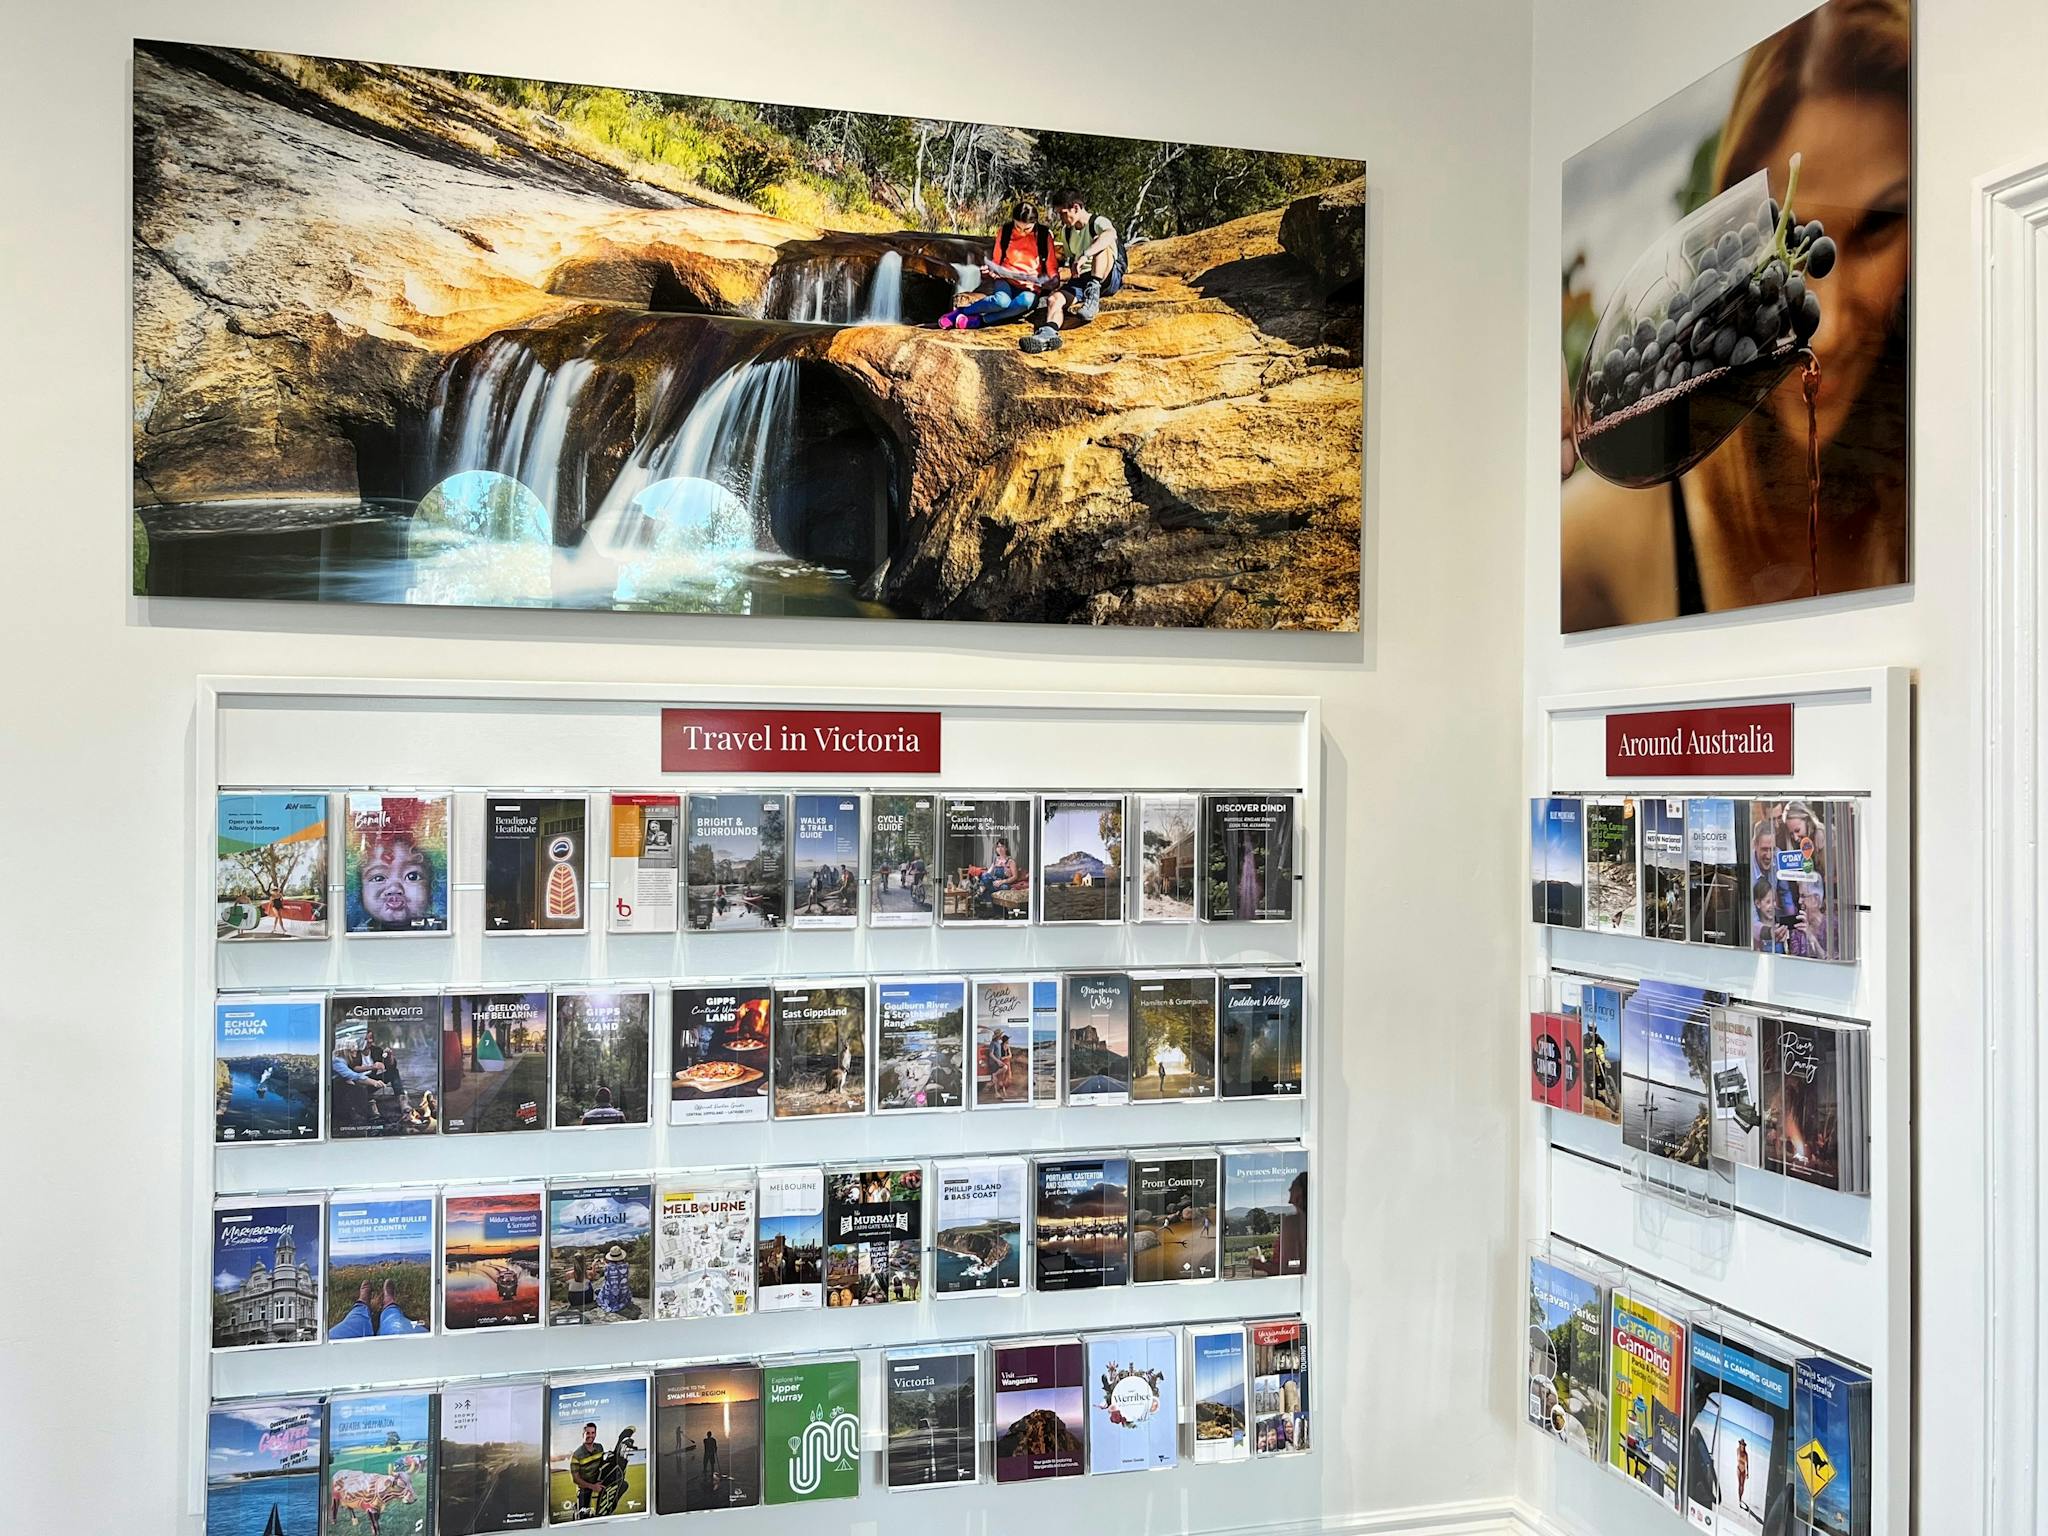 Large image of a rocky waterfall above a wall of travel booklets